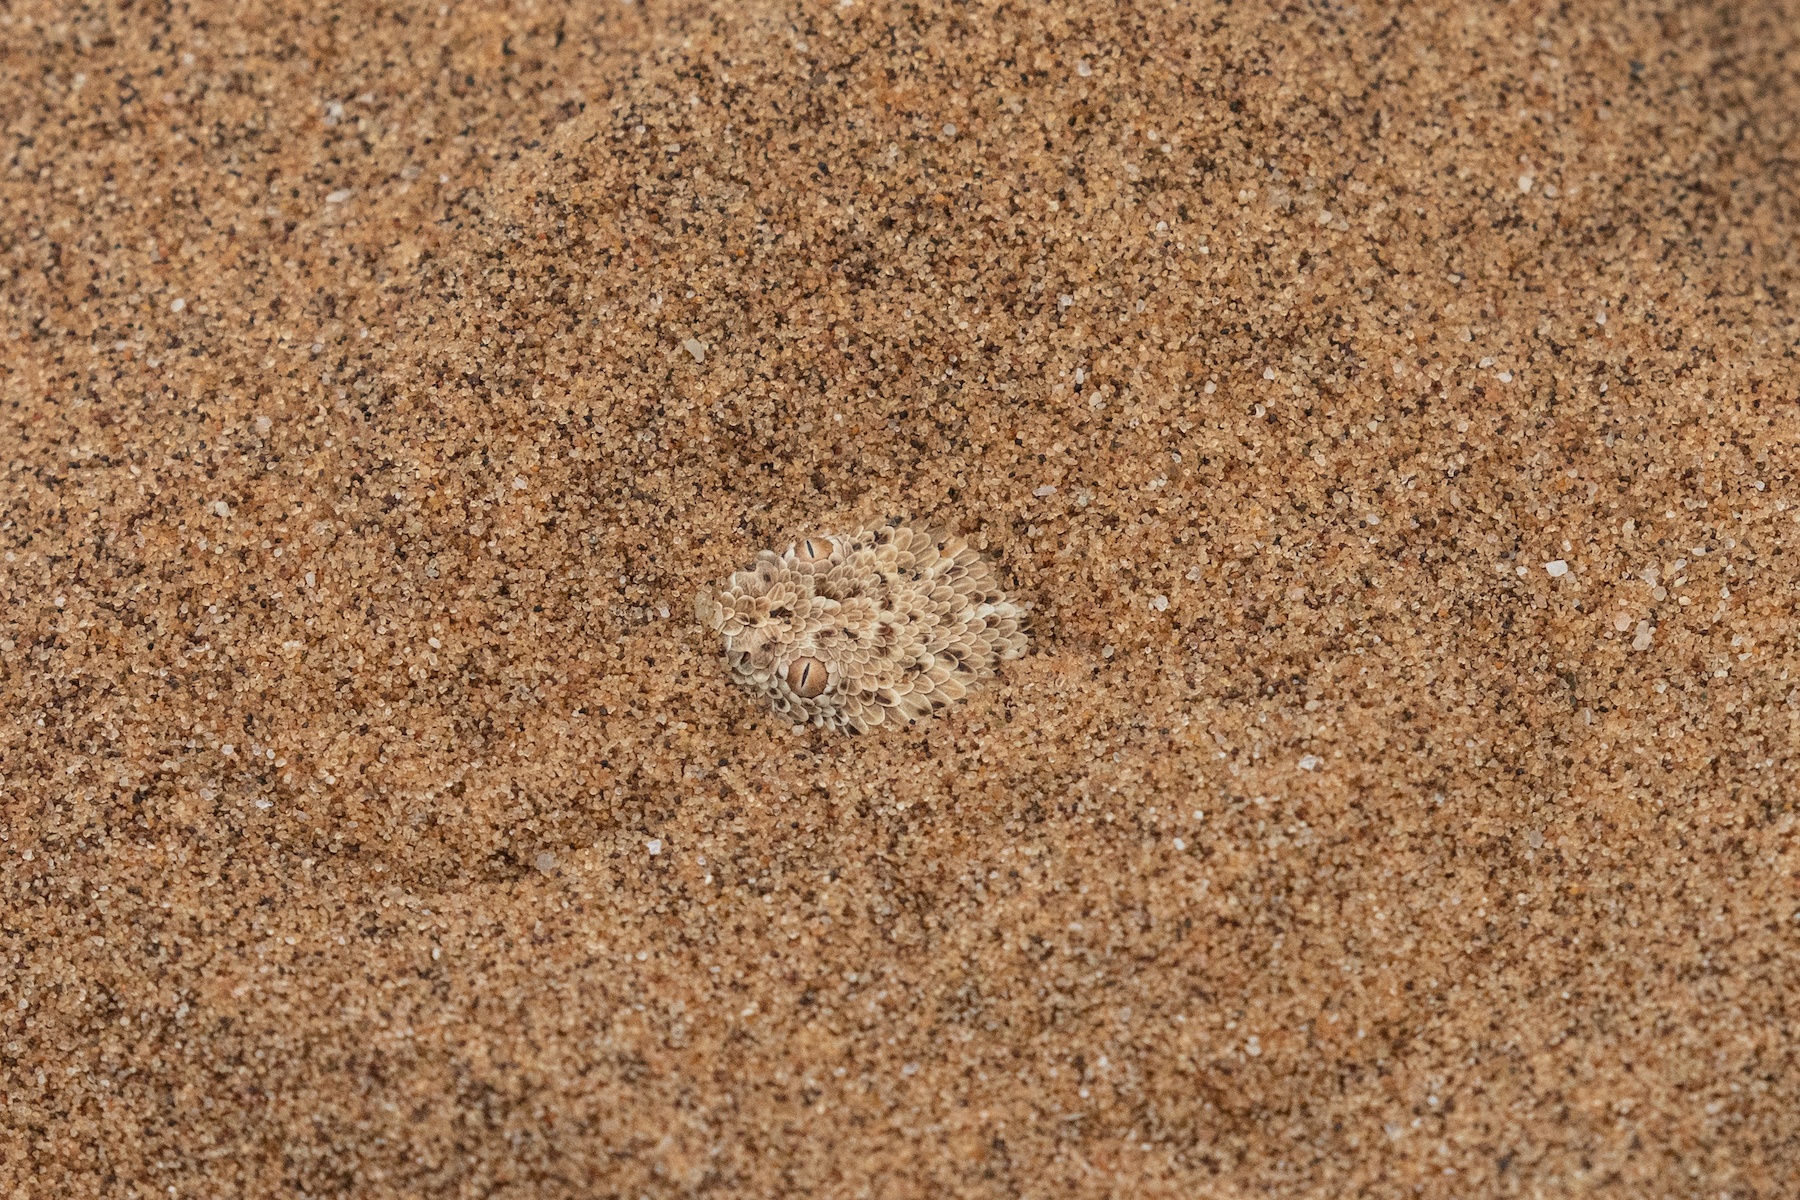 The tiny eyes of a Peringuey's Adder in the dune sands of Dorob